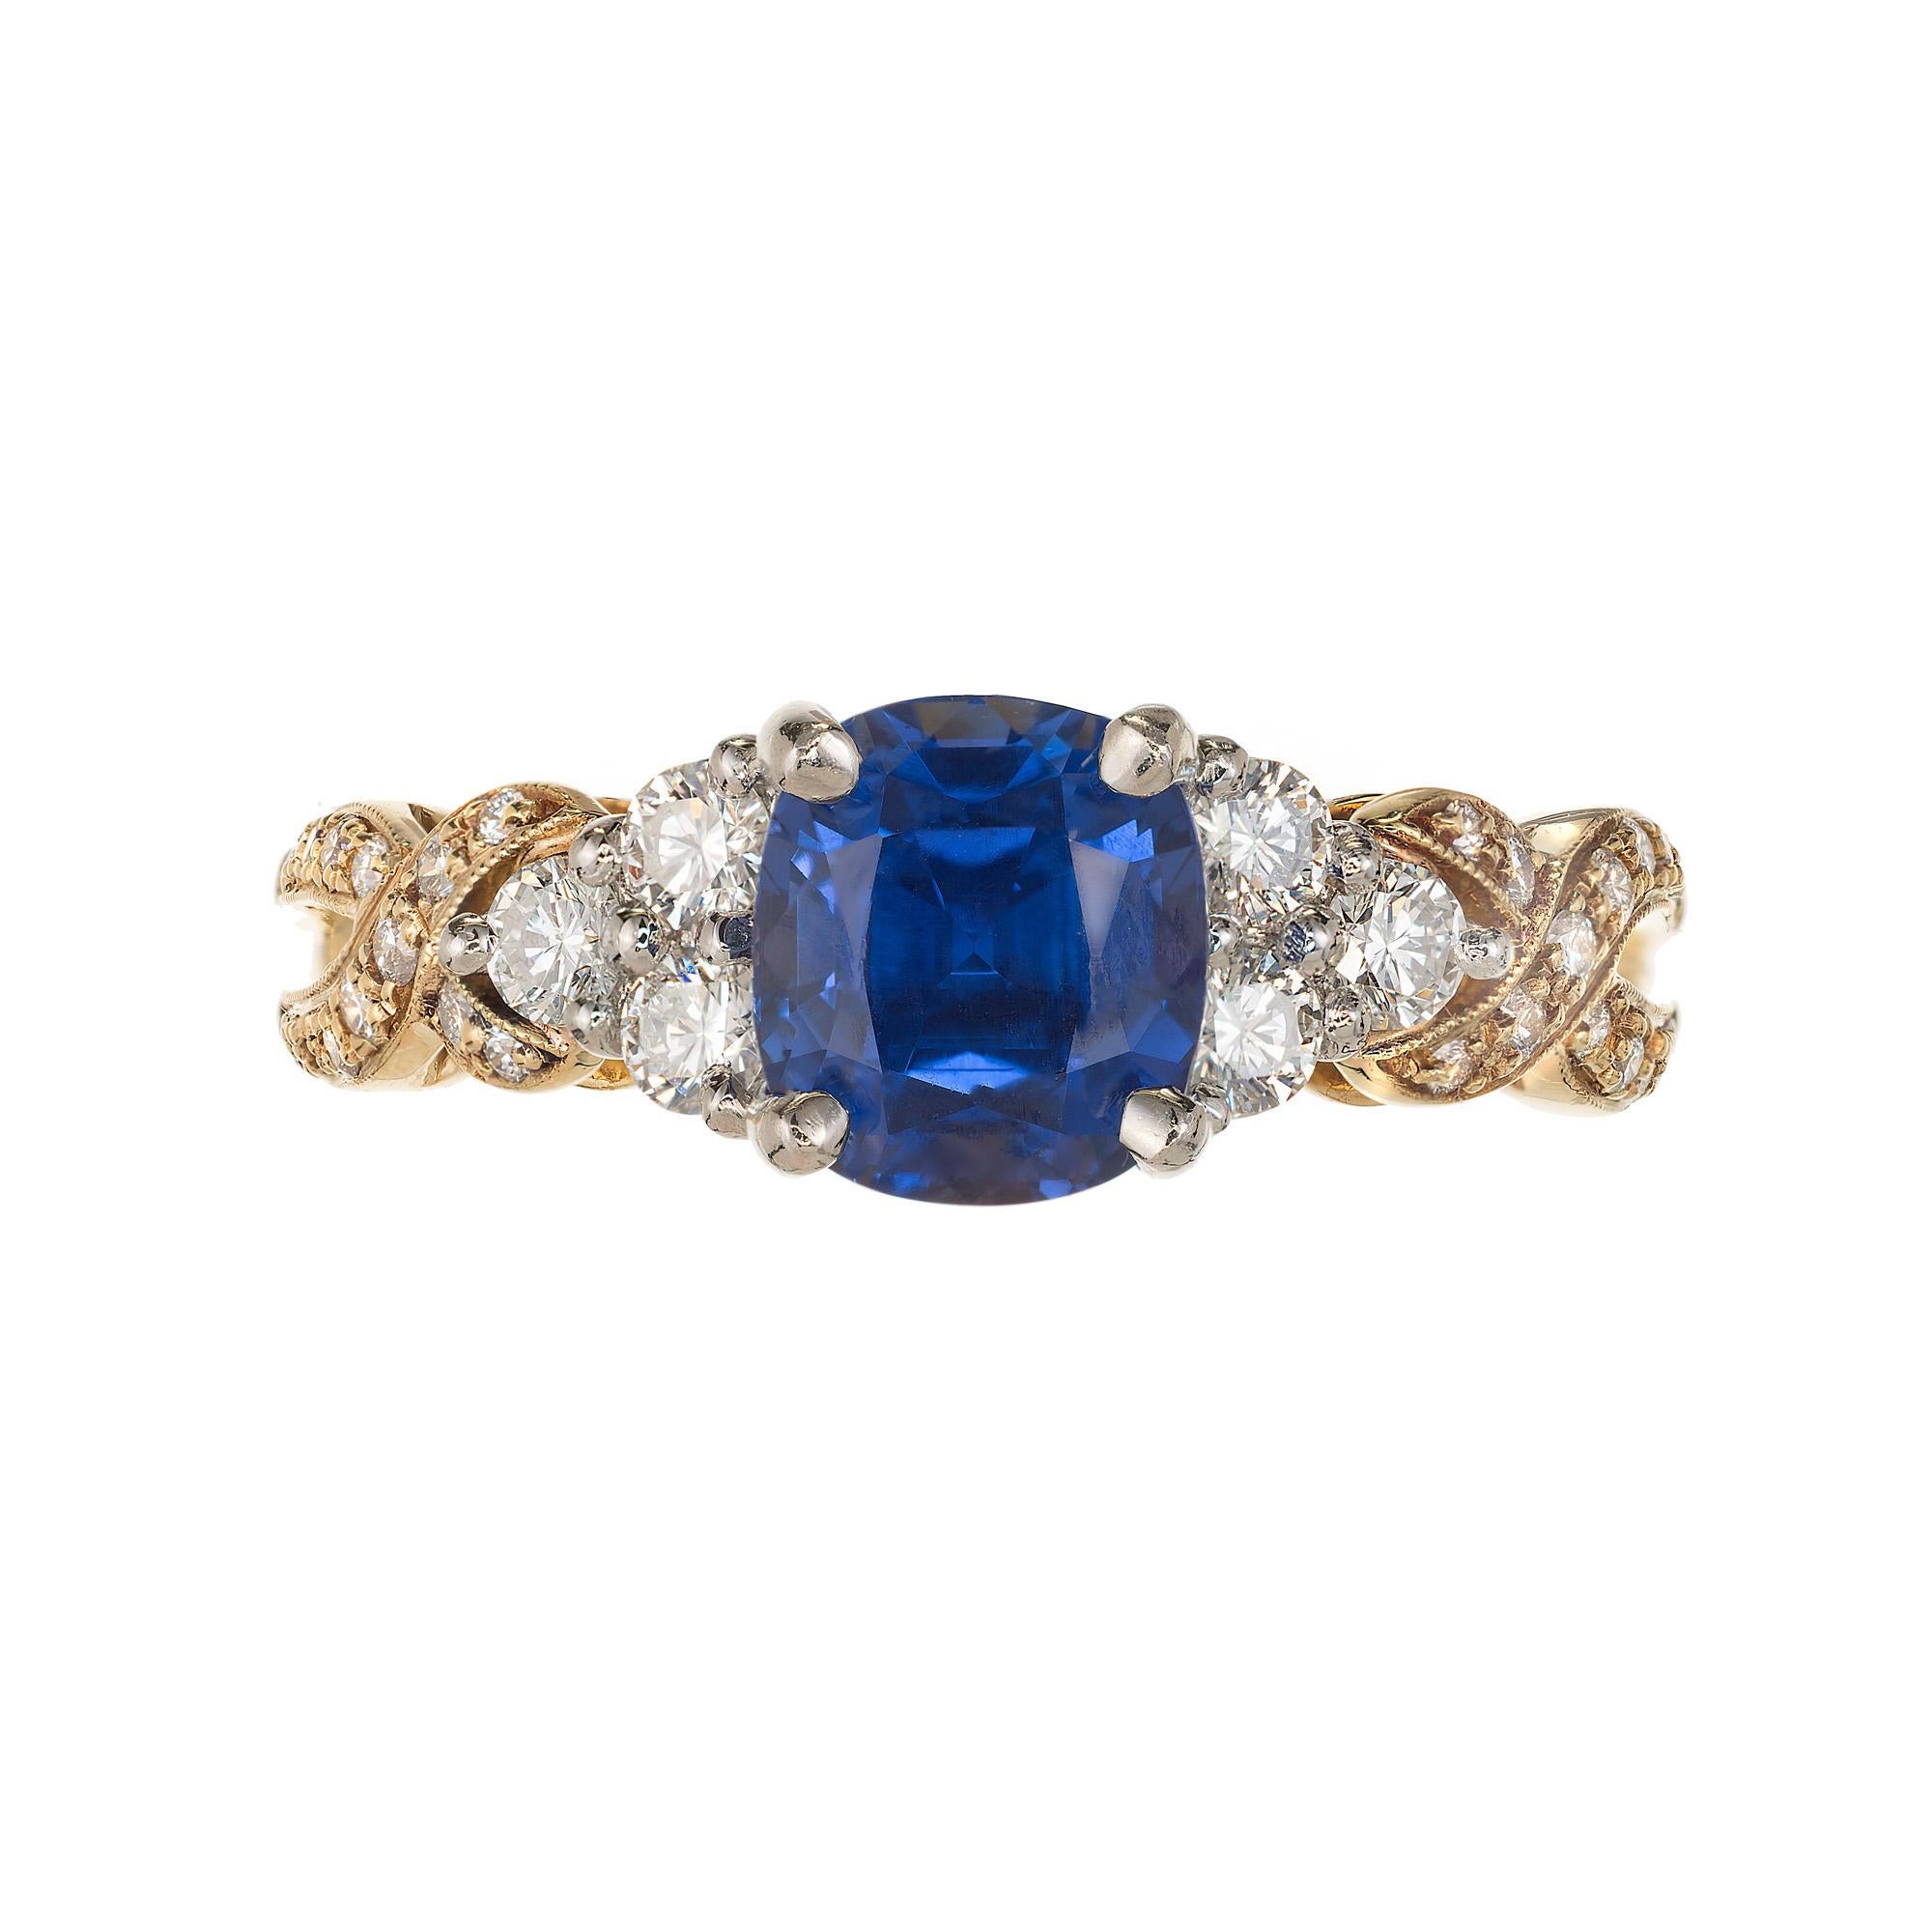 Krementz Cushion cut Sapphire and diamond engagement ring. GIA certified center stone is set in a 18k yellow gold and platinum setting with two yellow sapphires and 36 round diamonds. 

1 cushion gem blue with a hint of red Sapphire, approx. total